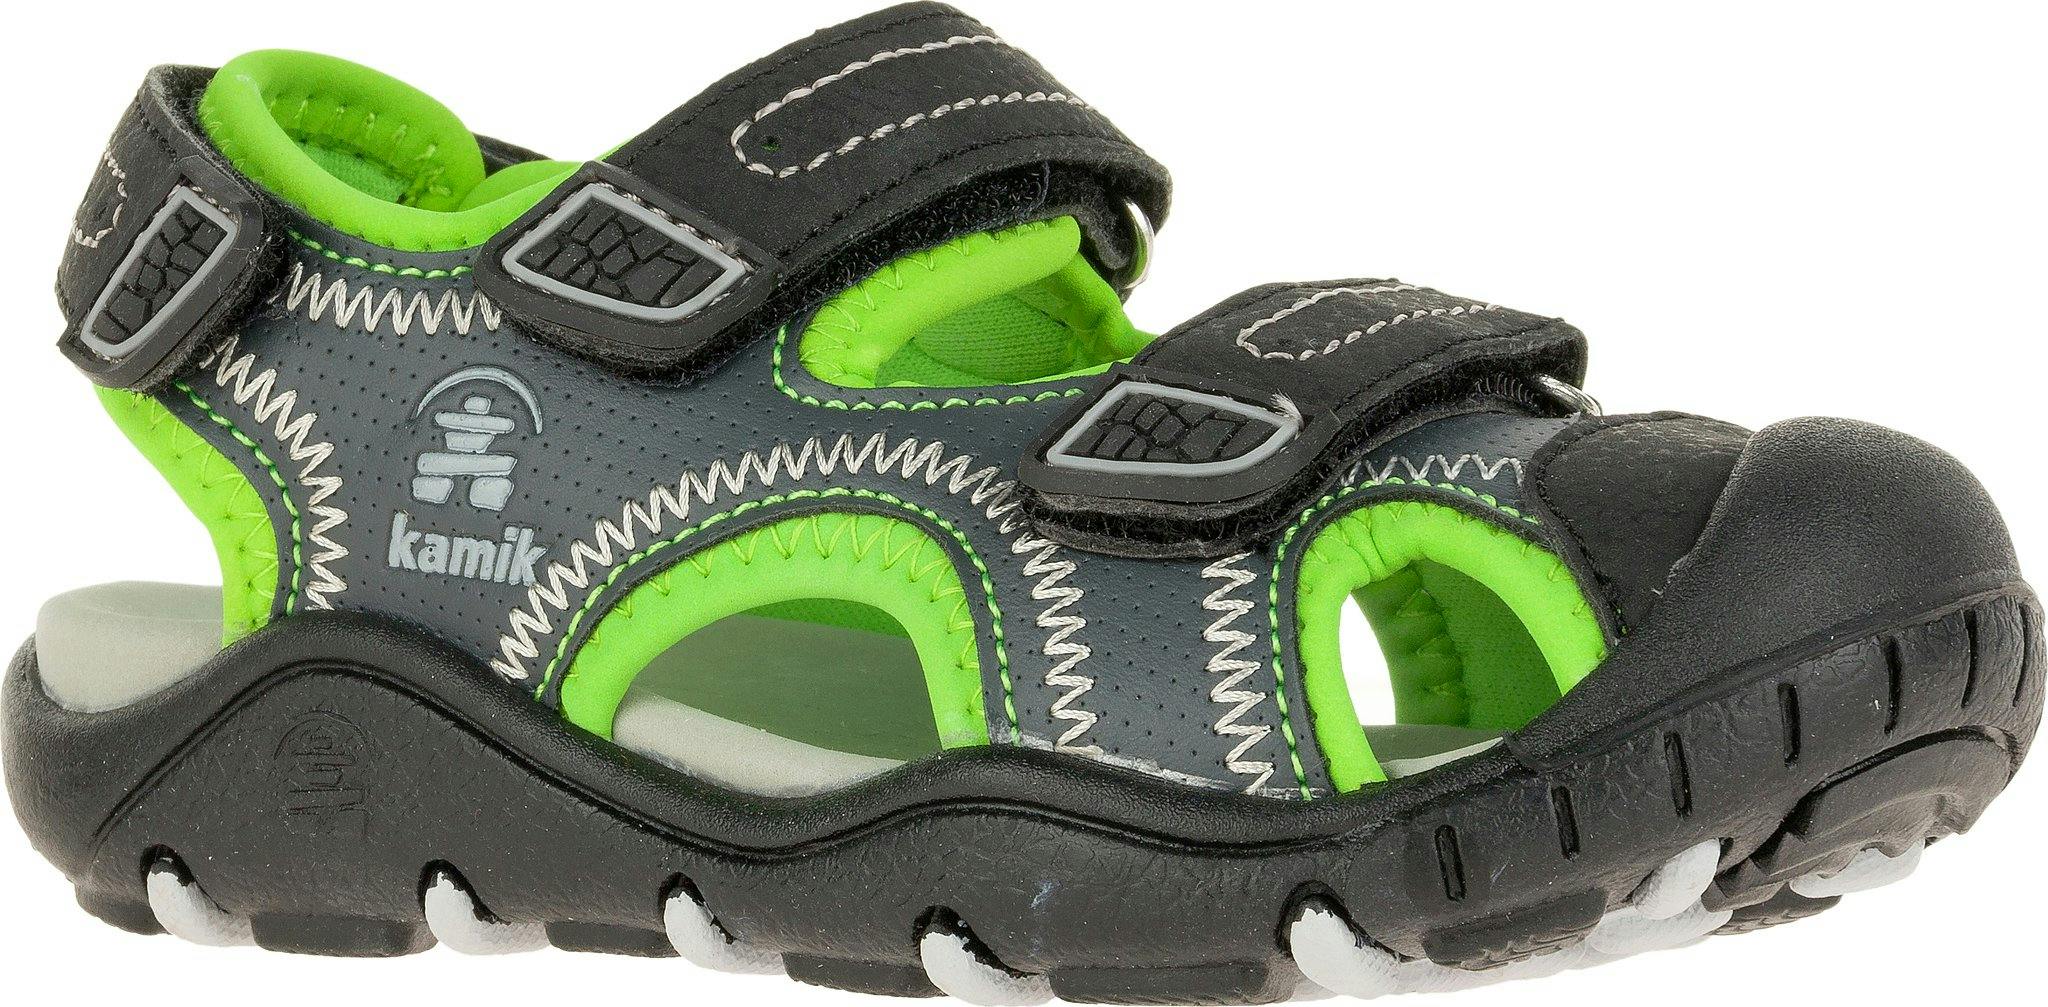 Product image for Seaturtle2 Sandals - Kids